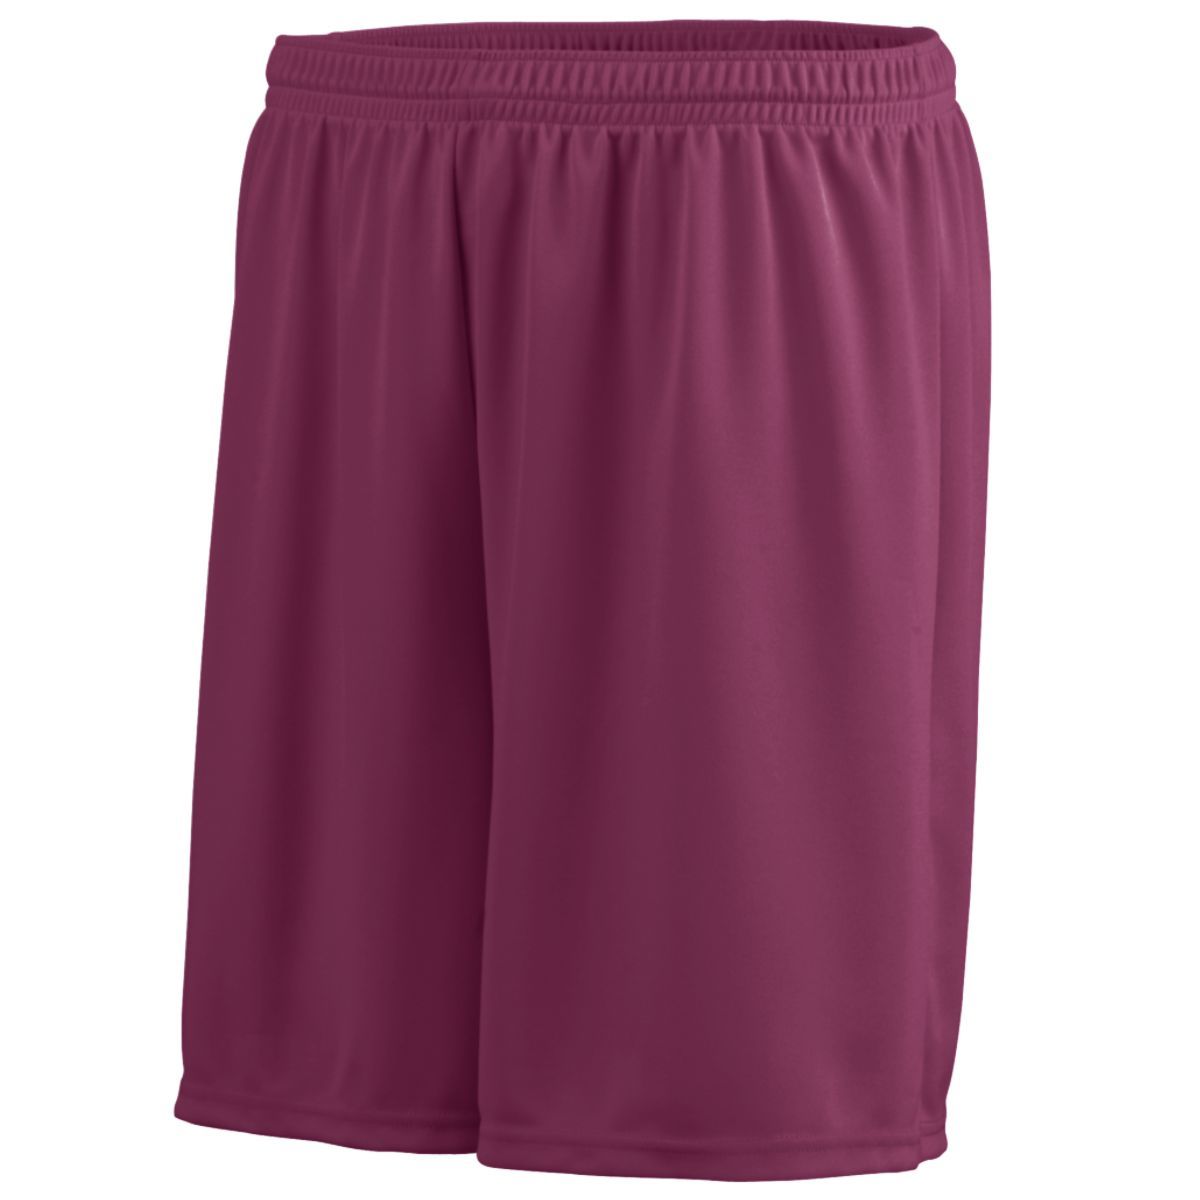 Augusta Sportswear Octane Shorts in Maroon  -Part of the Adult, Adult-Shorts, Augusta-Products product lines at KanaleyCreations.com